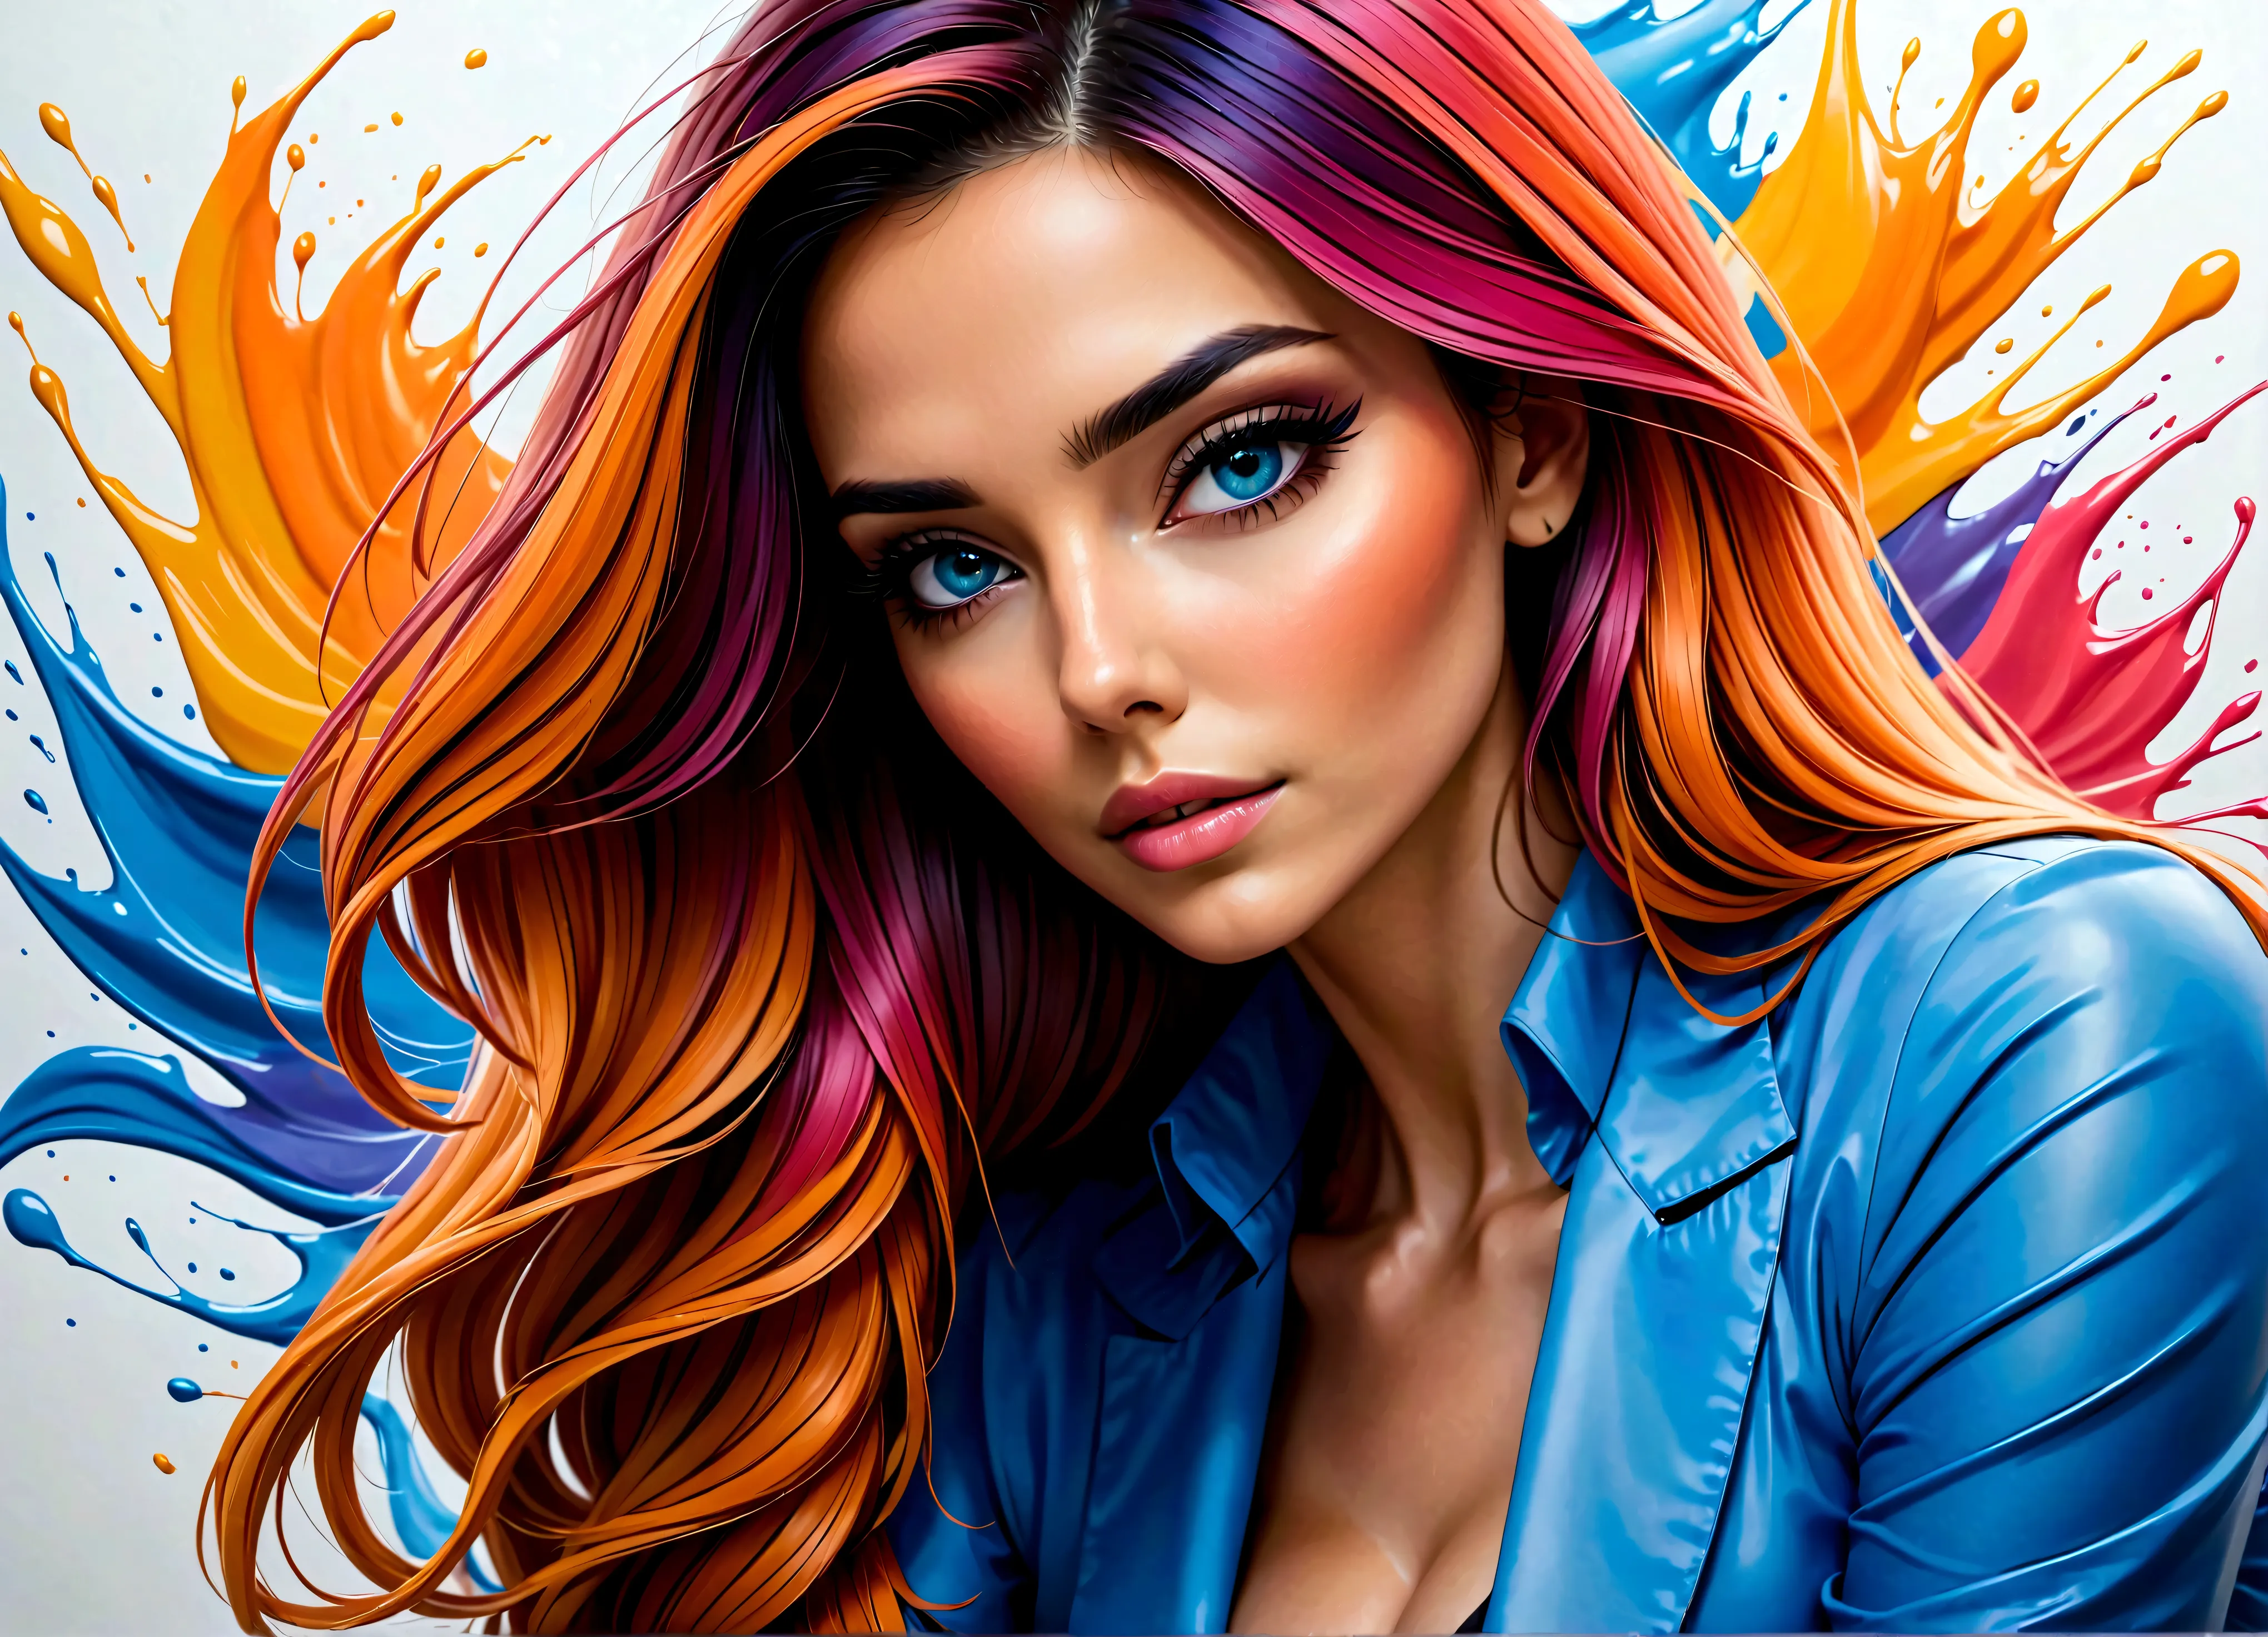 Uma linda mulher, highlighted in vibrant colors like a colored pencil drawing, tirando o cabelo do rosto. The woman is very well...